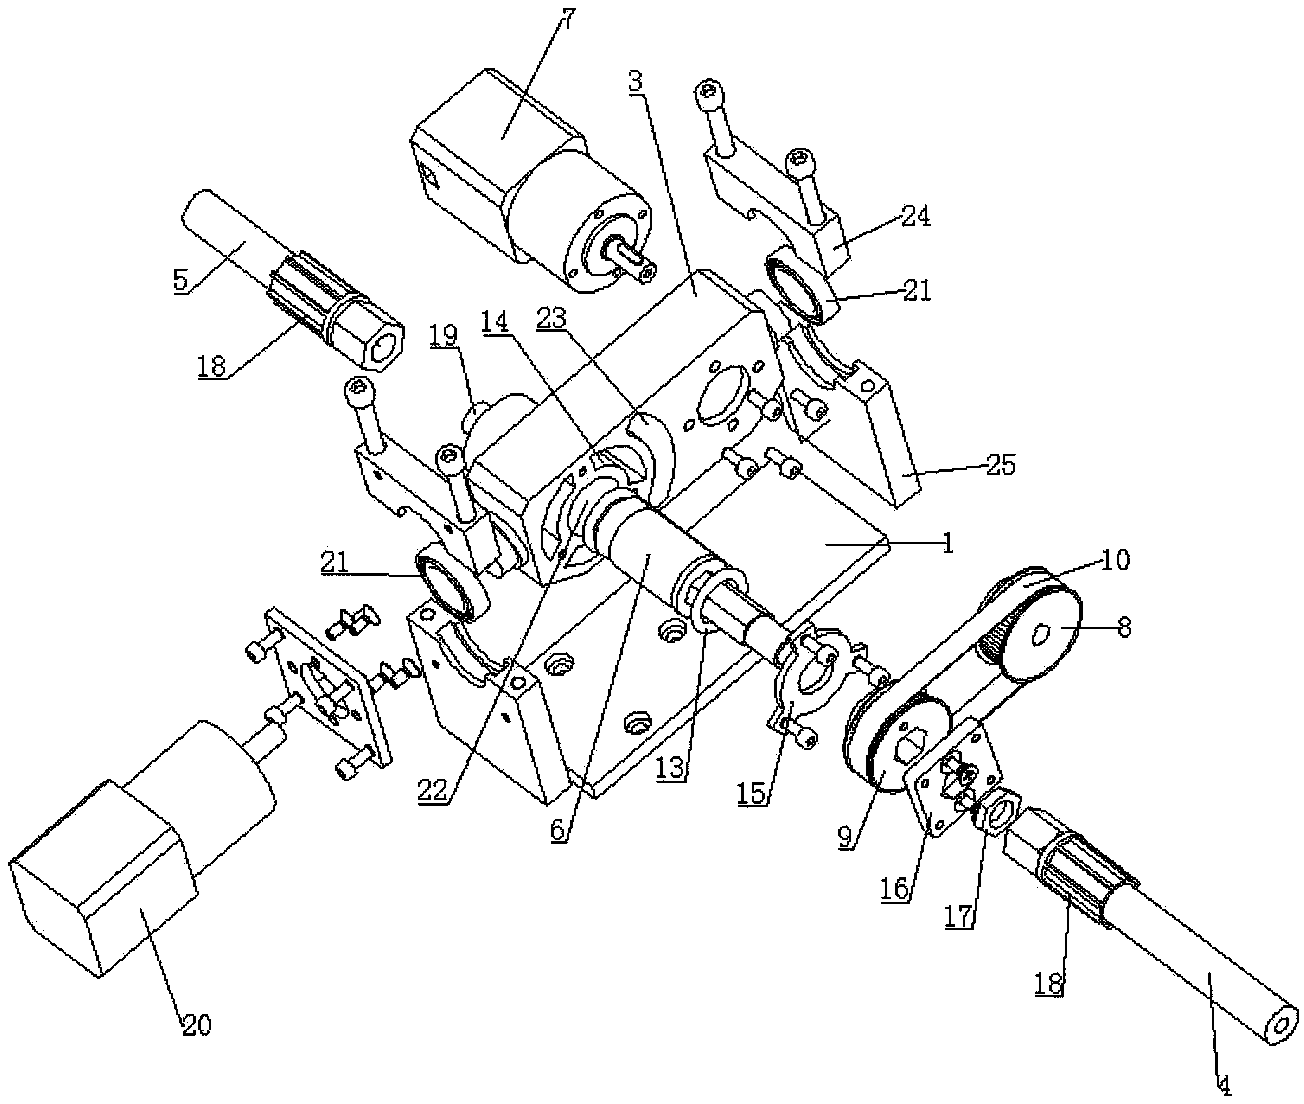 Multi-dimensional gearing for cleaning equipment